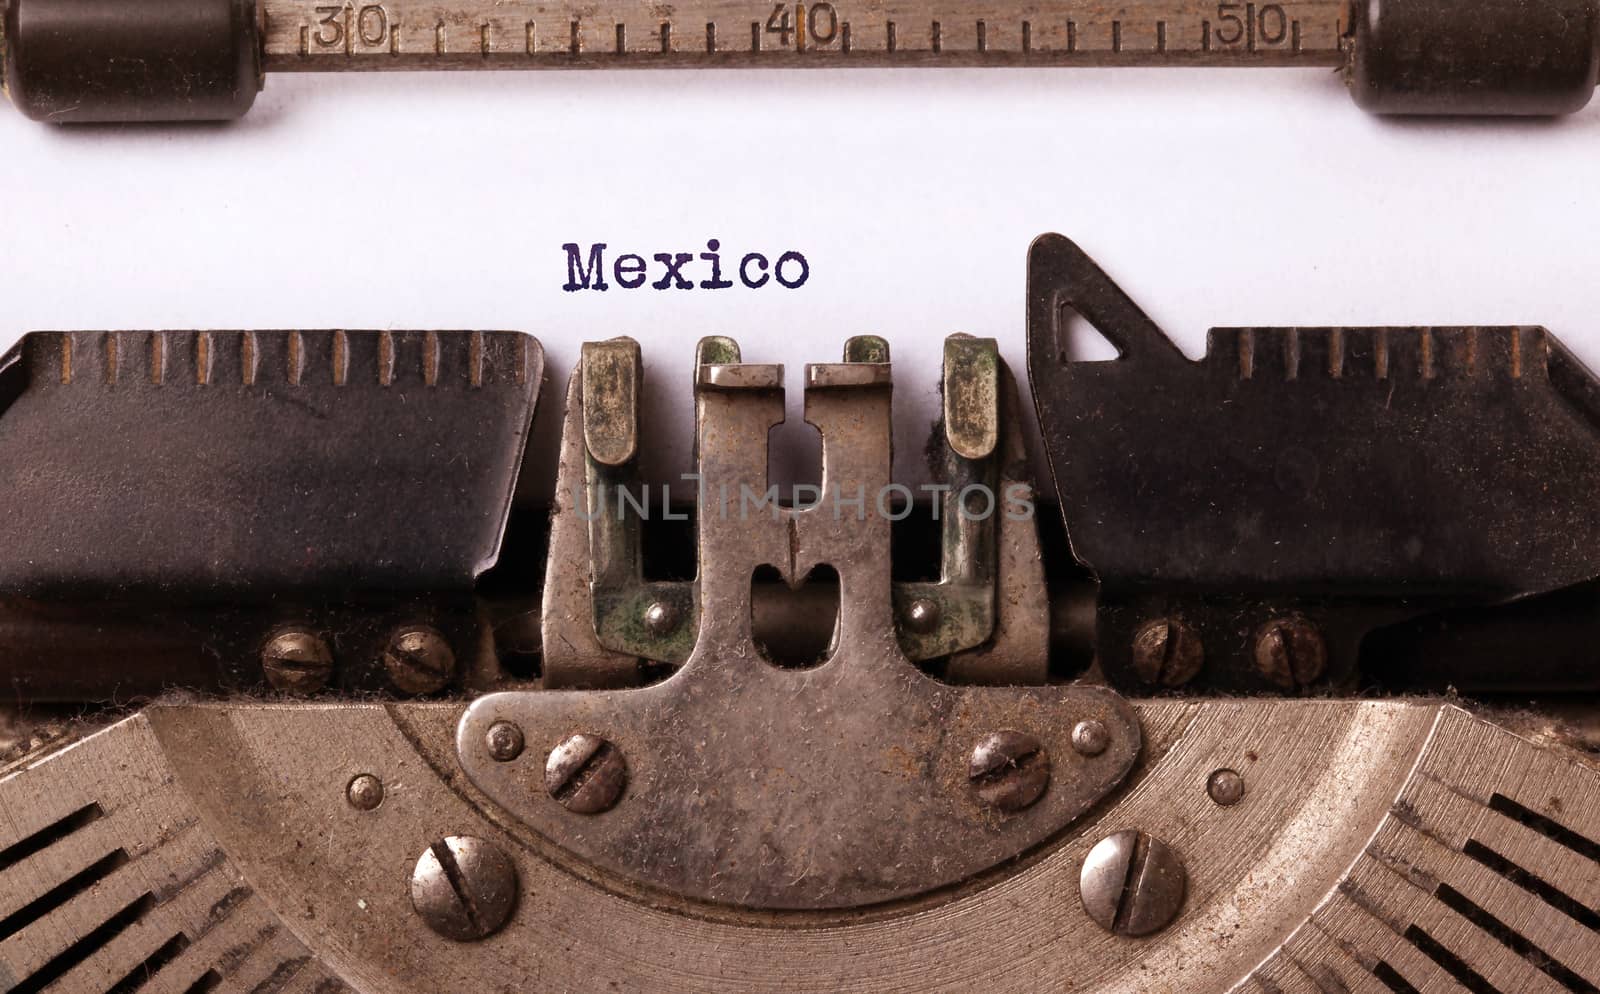 Old typewriter - Mexico by michaklootwijk